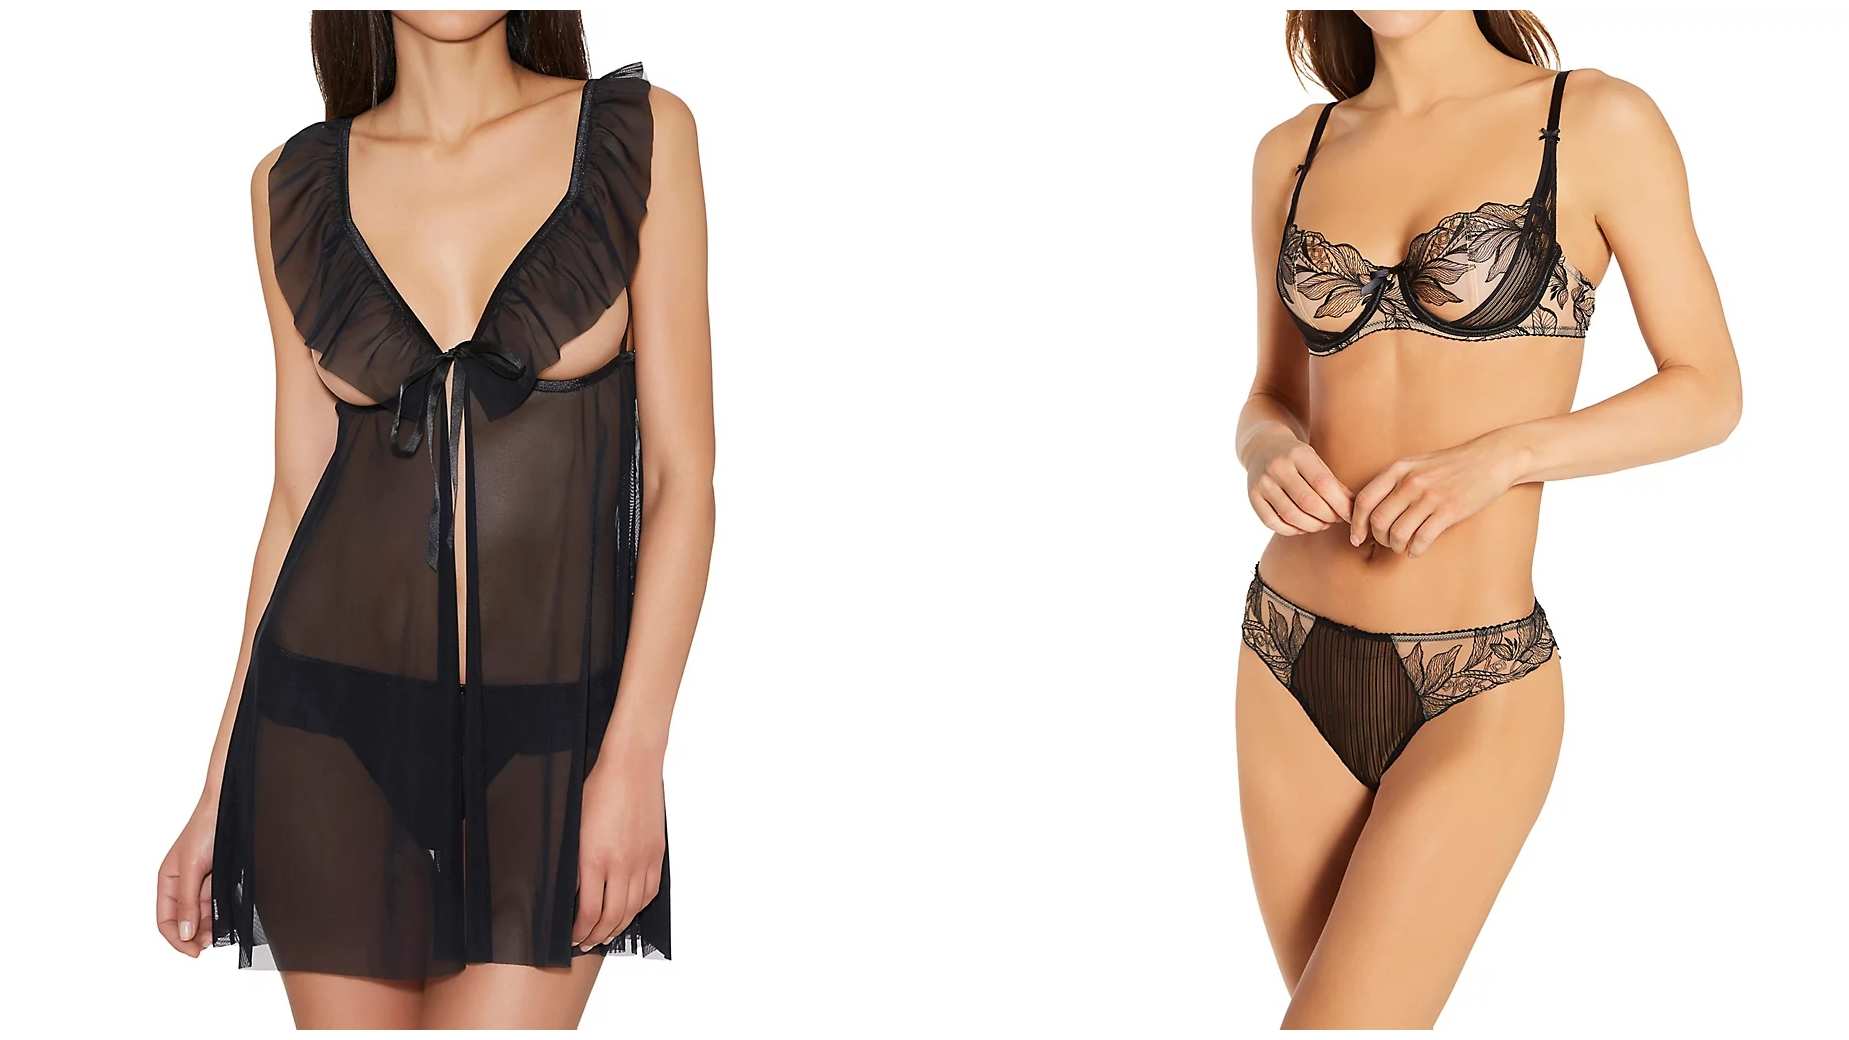 A lingerie buyers guide is a great place to get Valentine's day gift ideas.